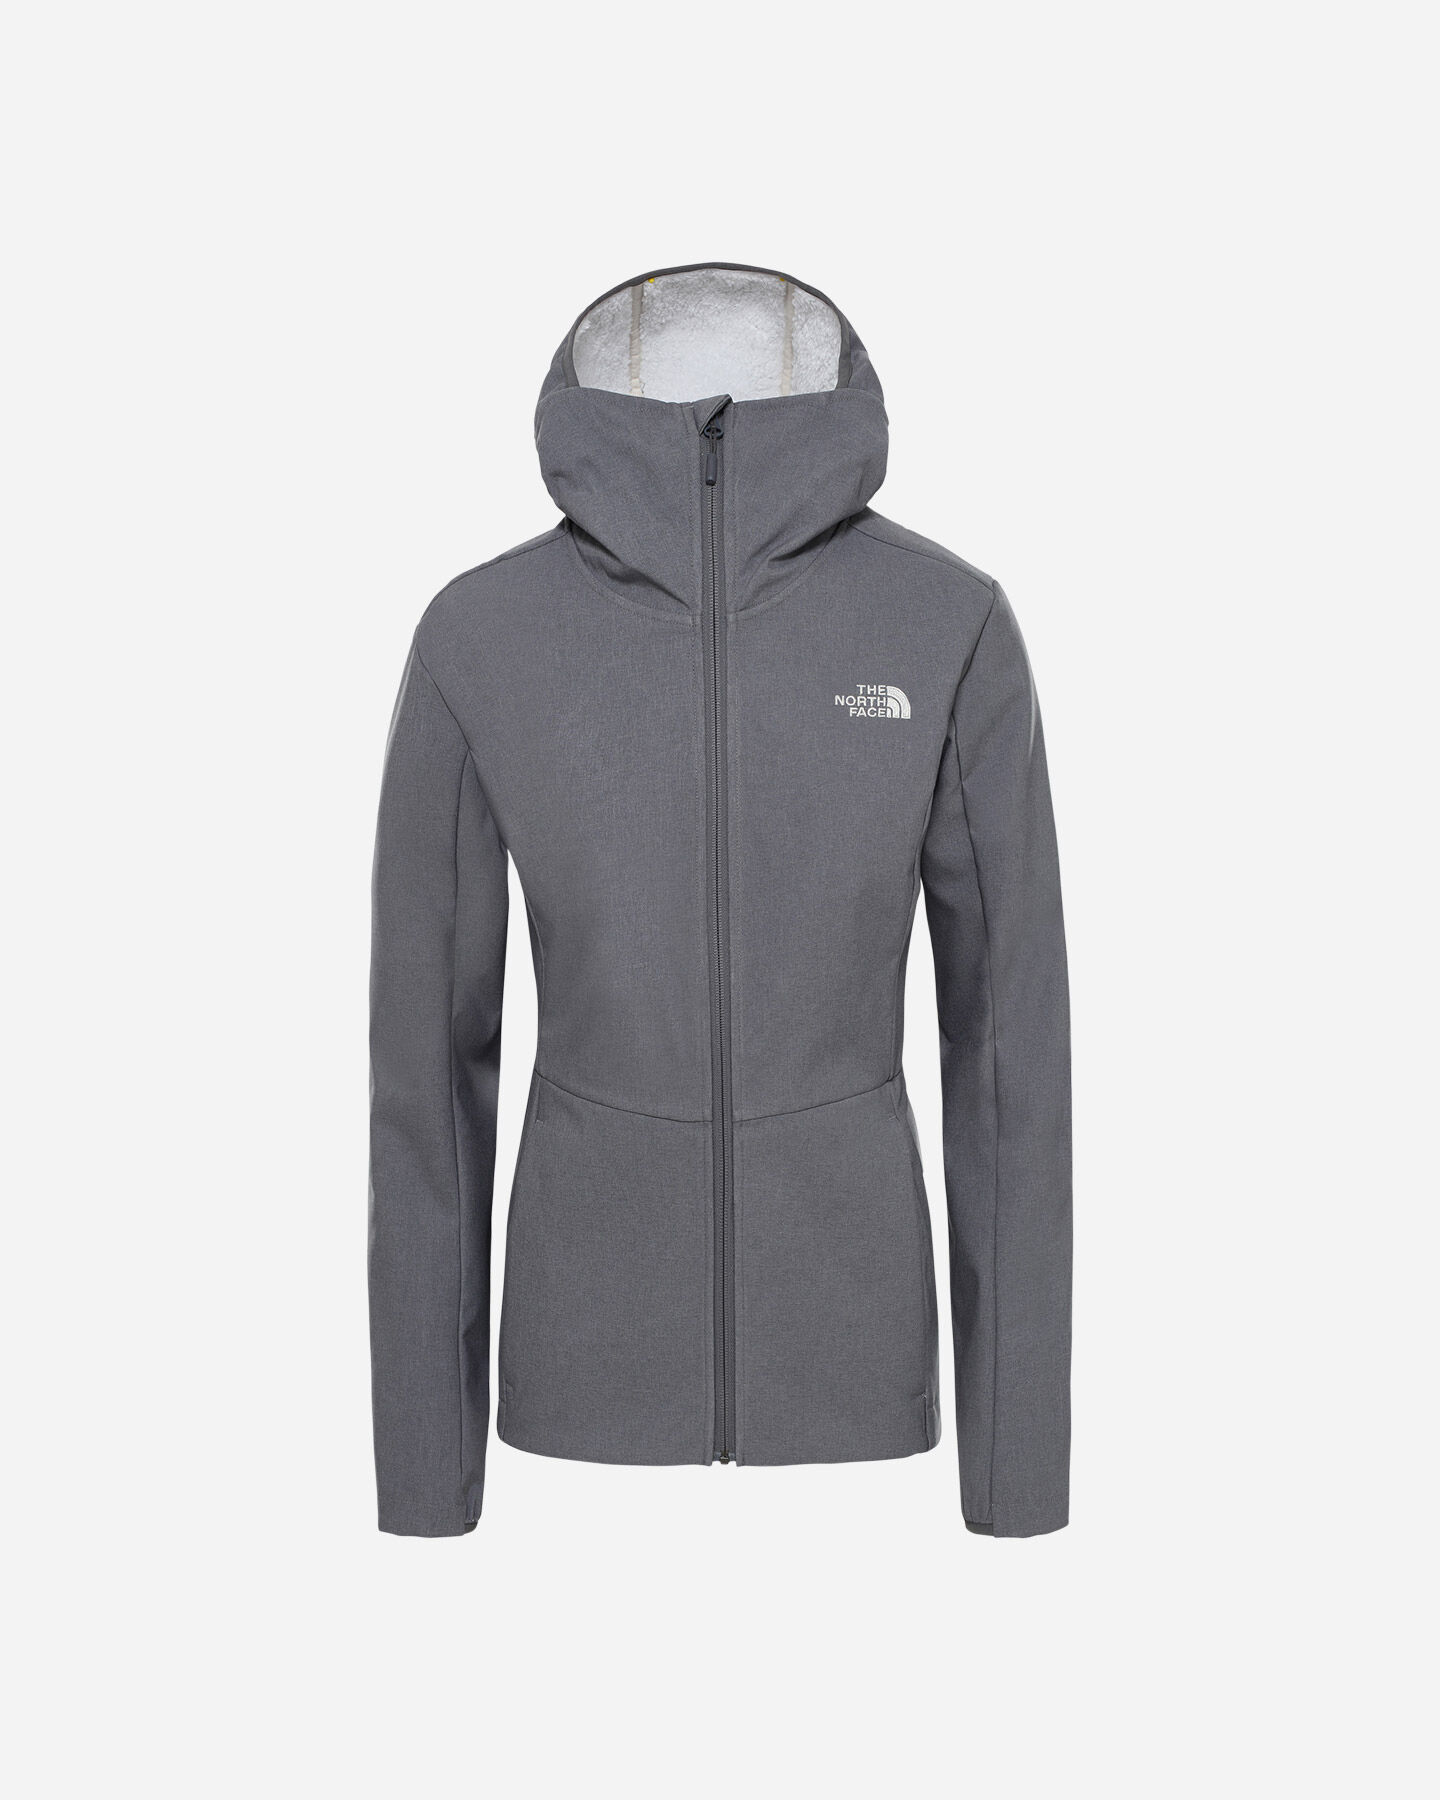  Pile THE NORTH FACE QUEST HIGHLOFT W S5086823|J4E|S scatto 0